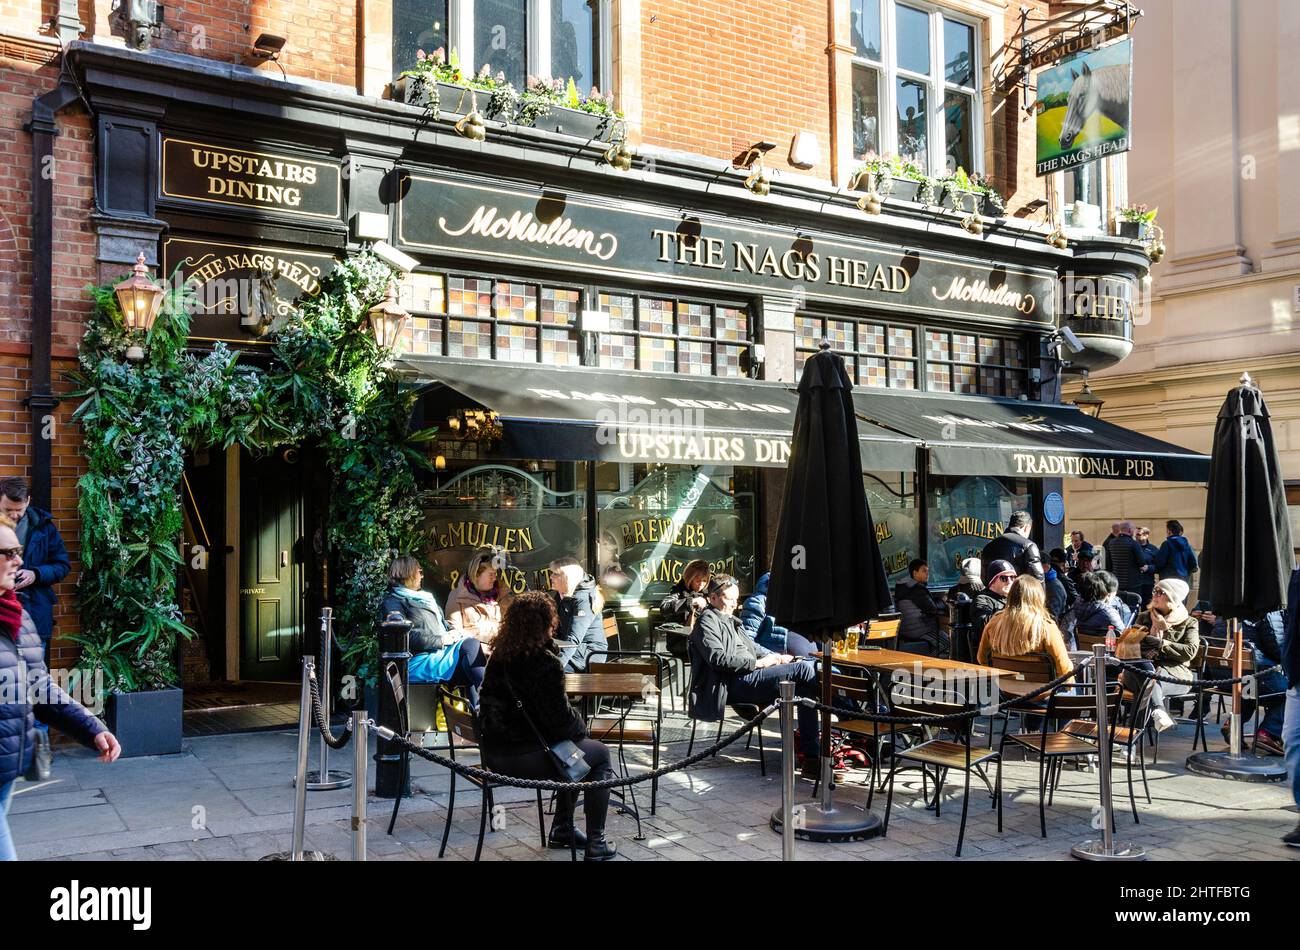 The Nags Head pub on James Street in the Covent Garden area of London, UK Stock Photo